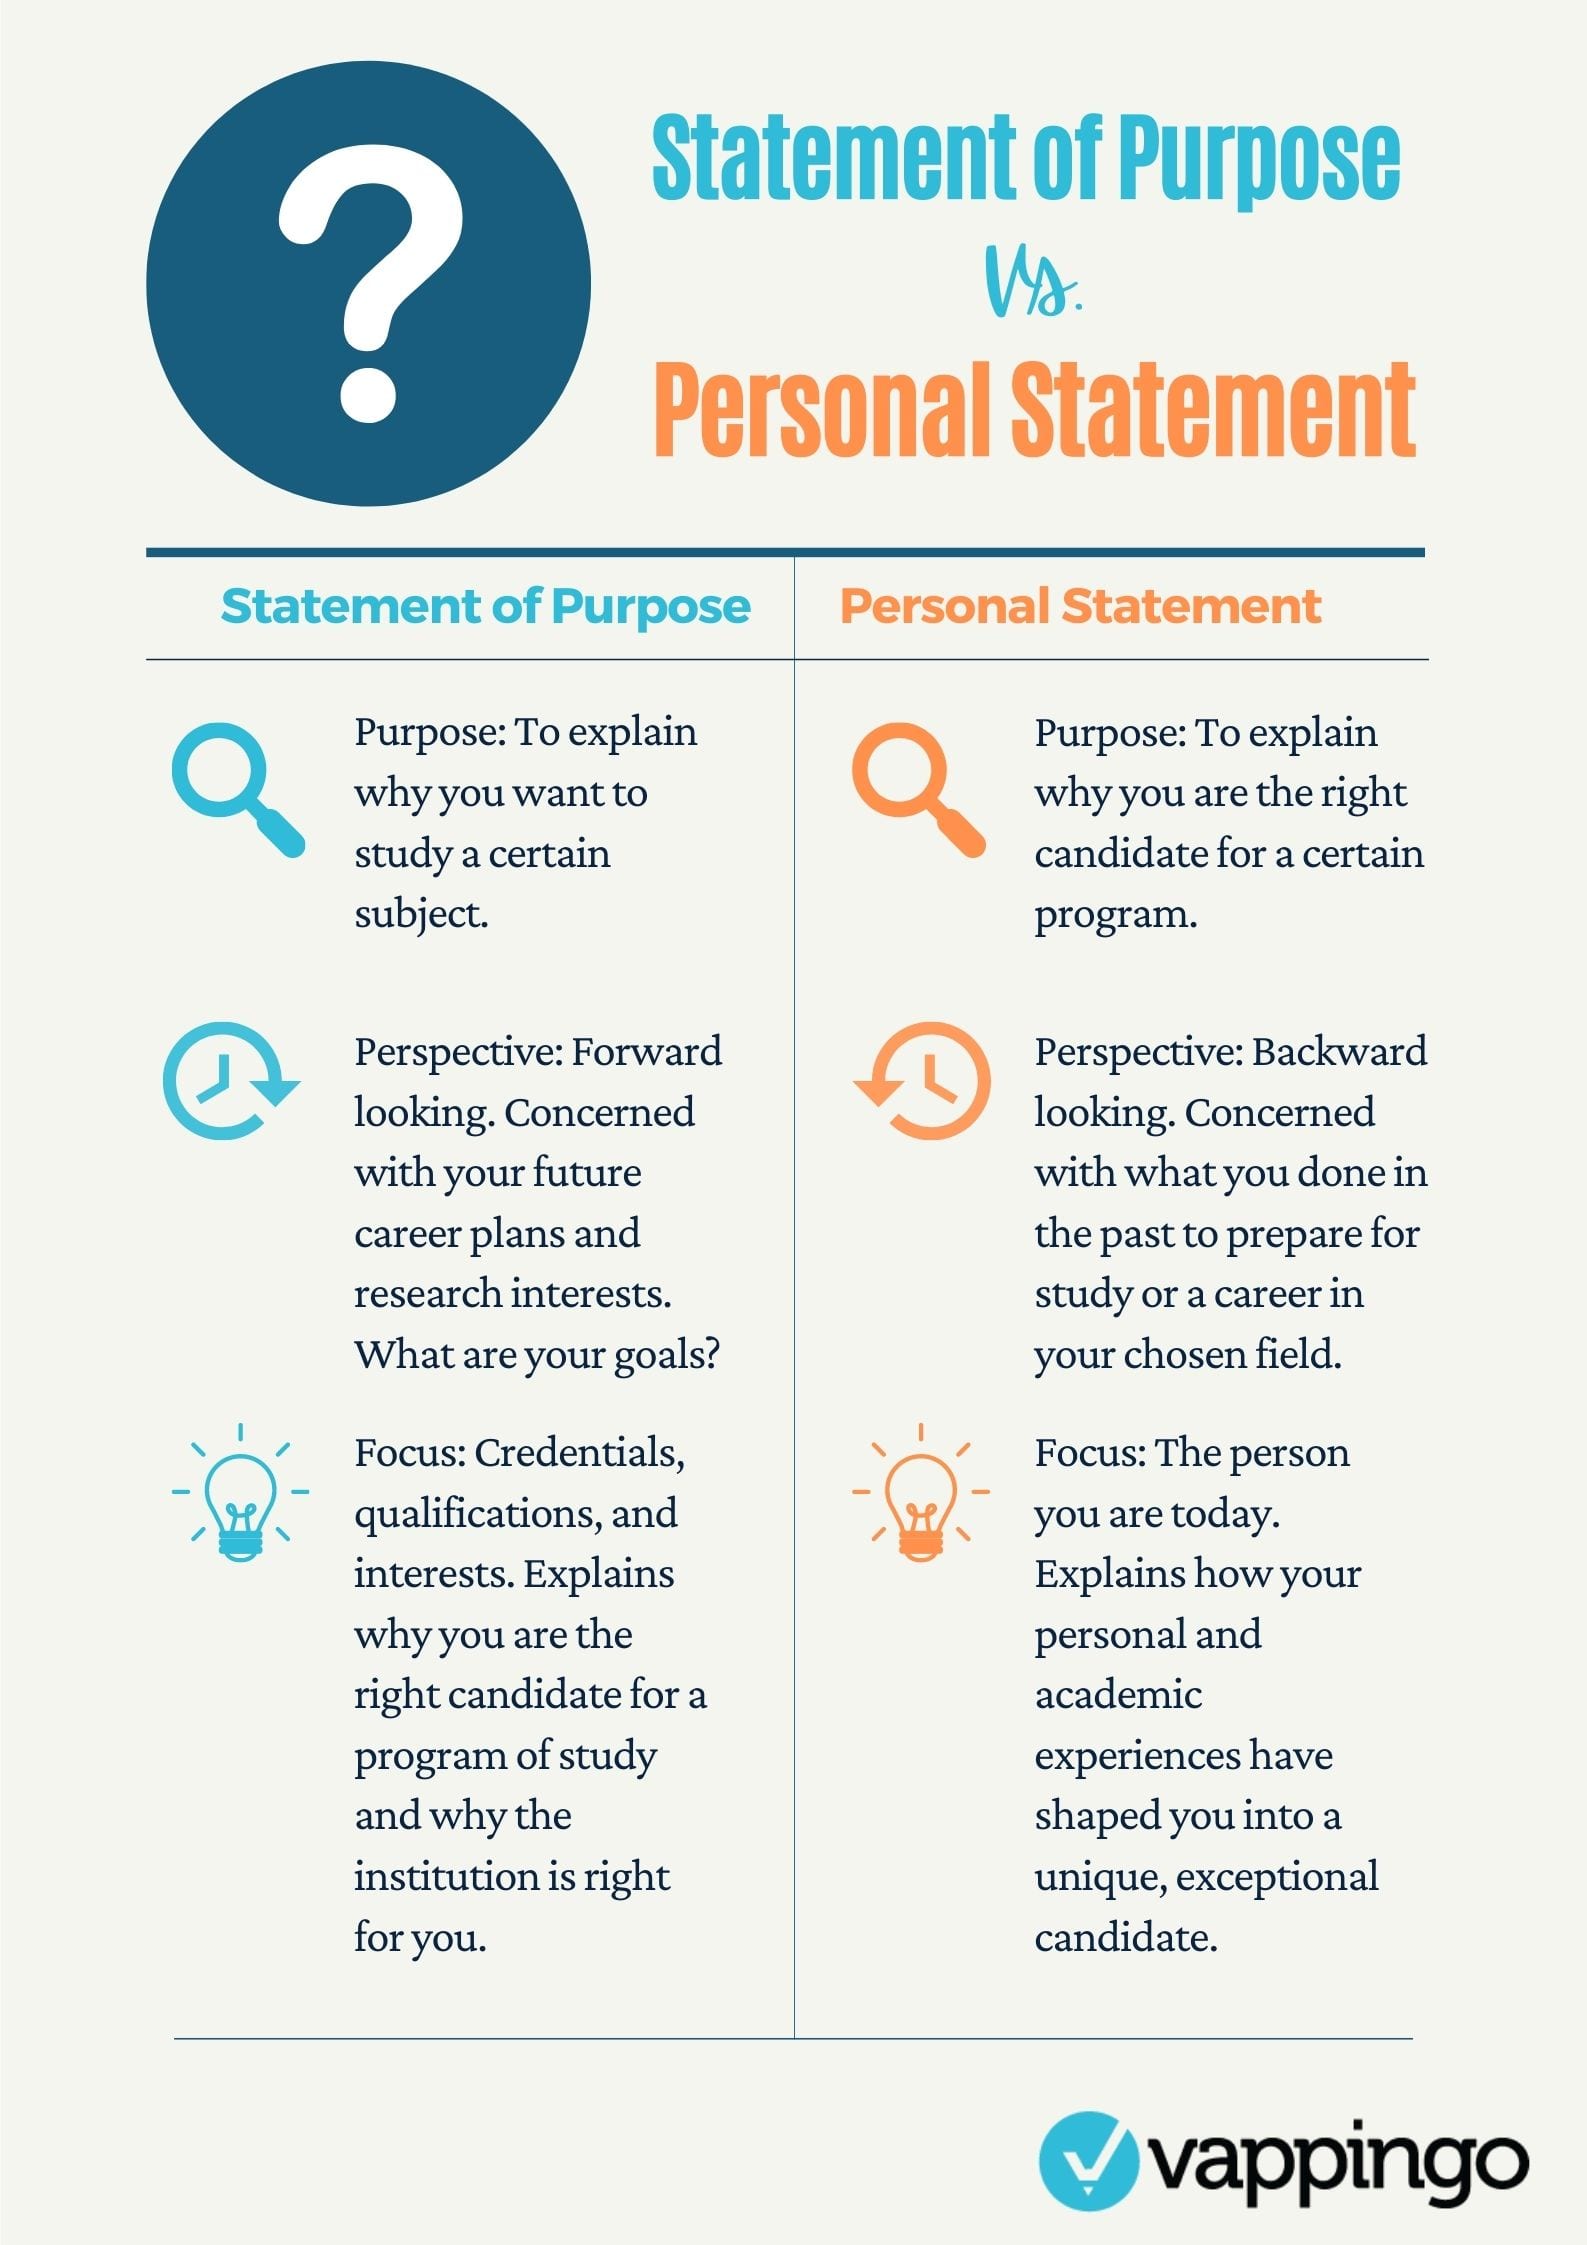 the difference between personal statement and statement of purpose